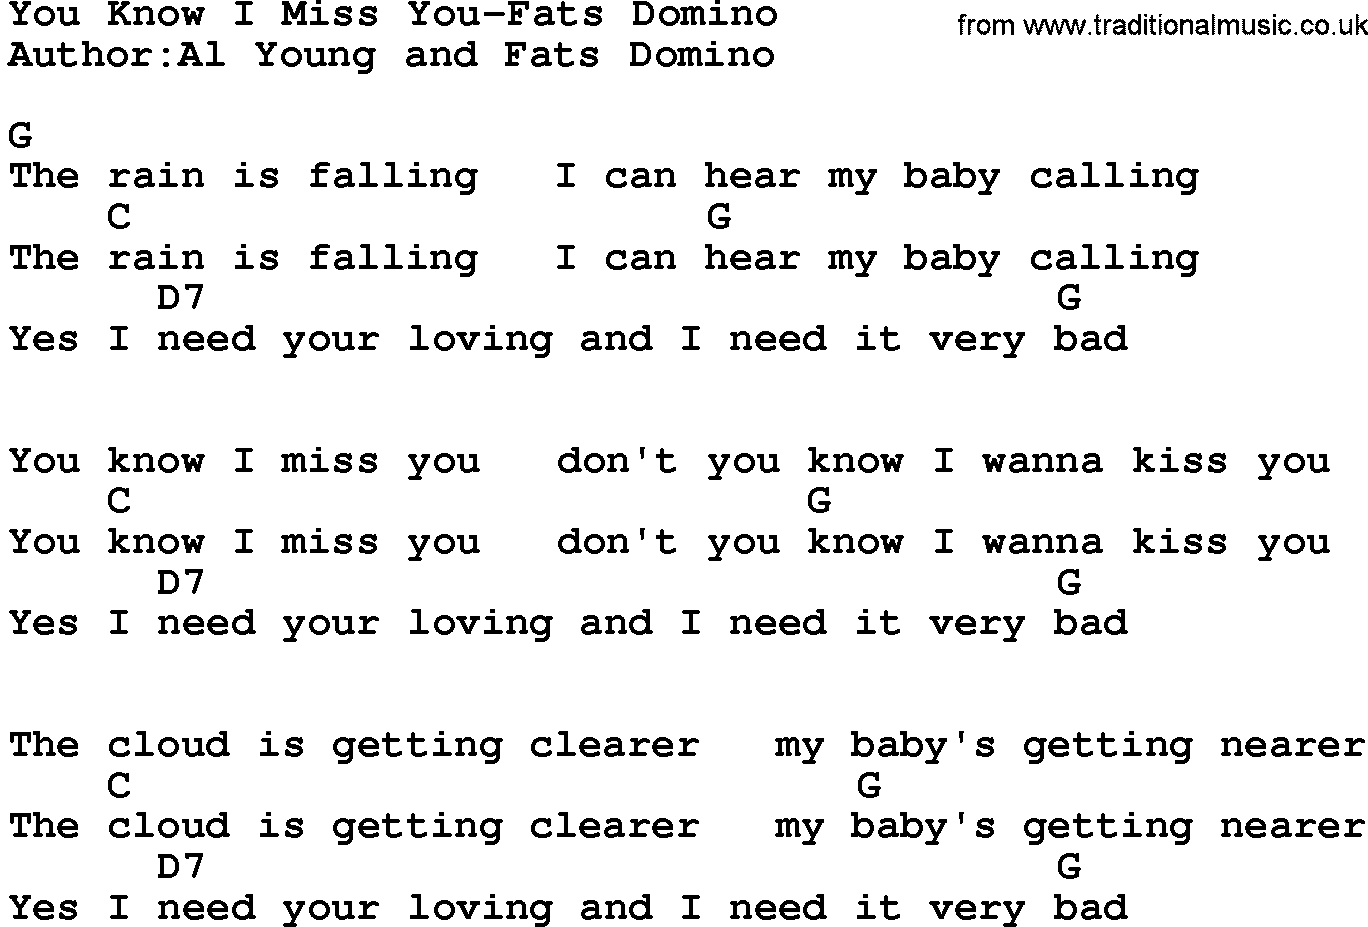 Country music song: You Know I Miss You-Fats Domino lyrics and chords